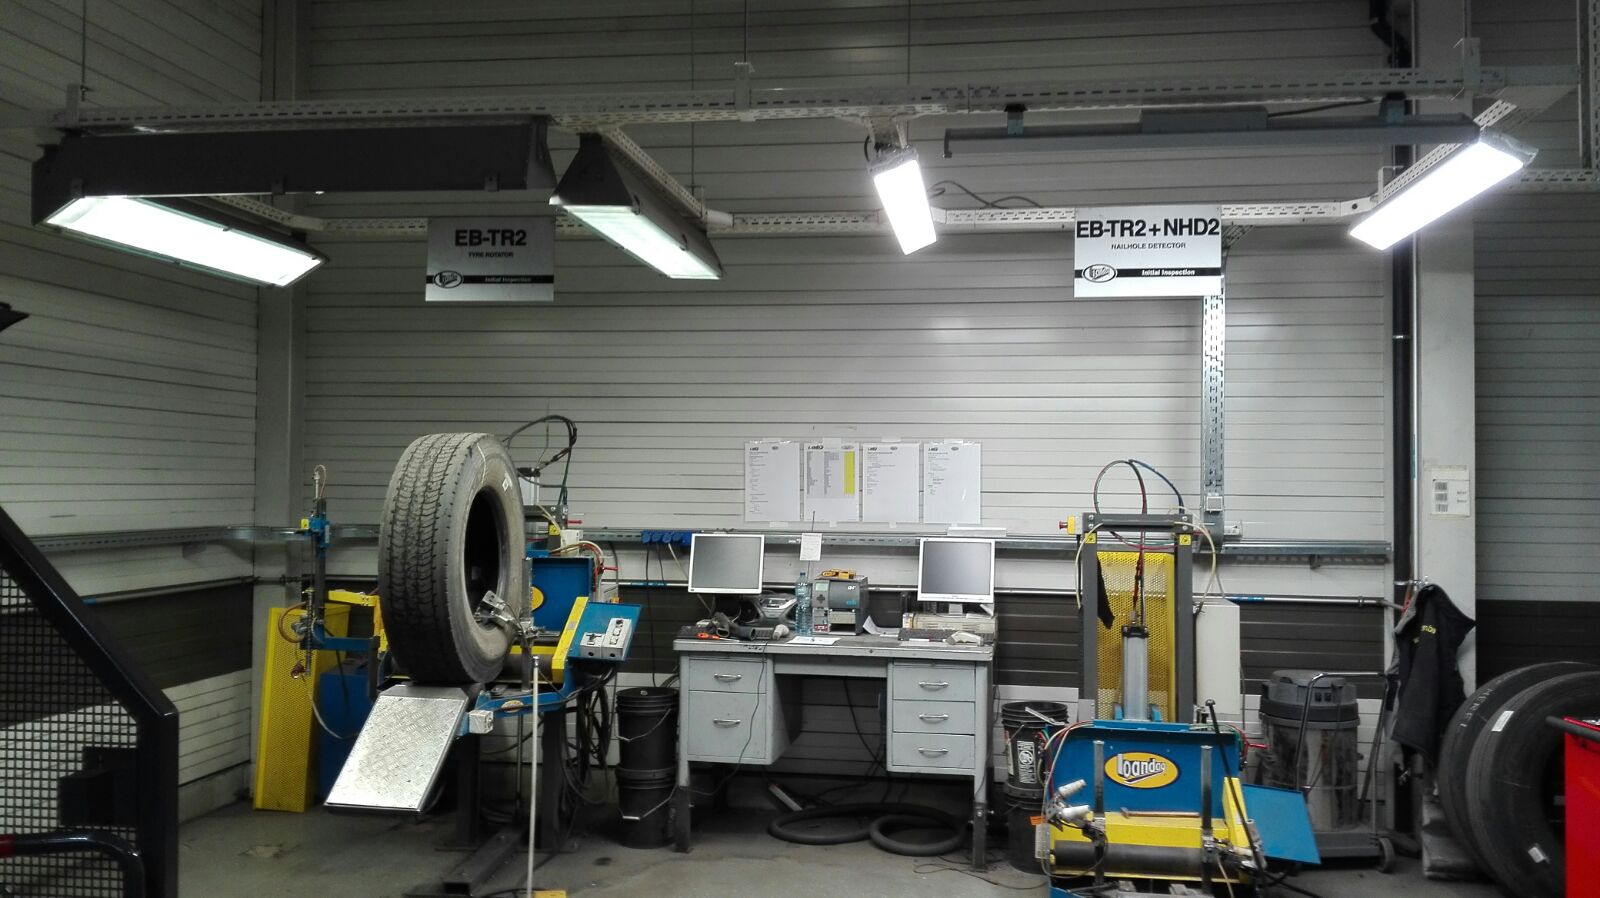 Tire center De Condé, test NANA high bay (right), measured twice the light output in comparison with fluorescent lights (left).